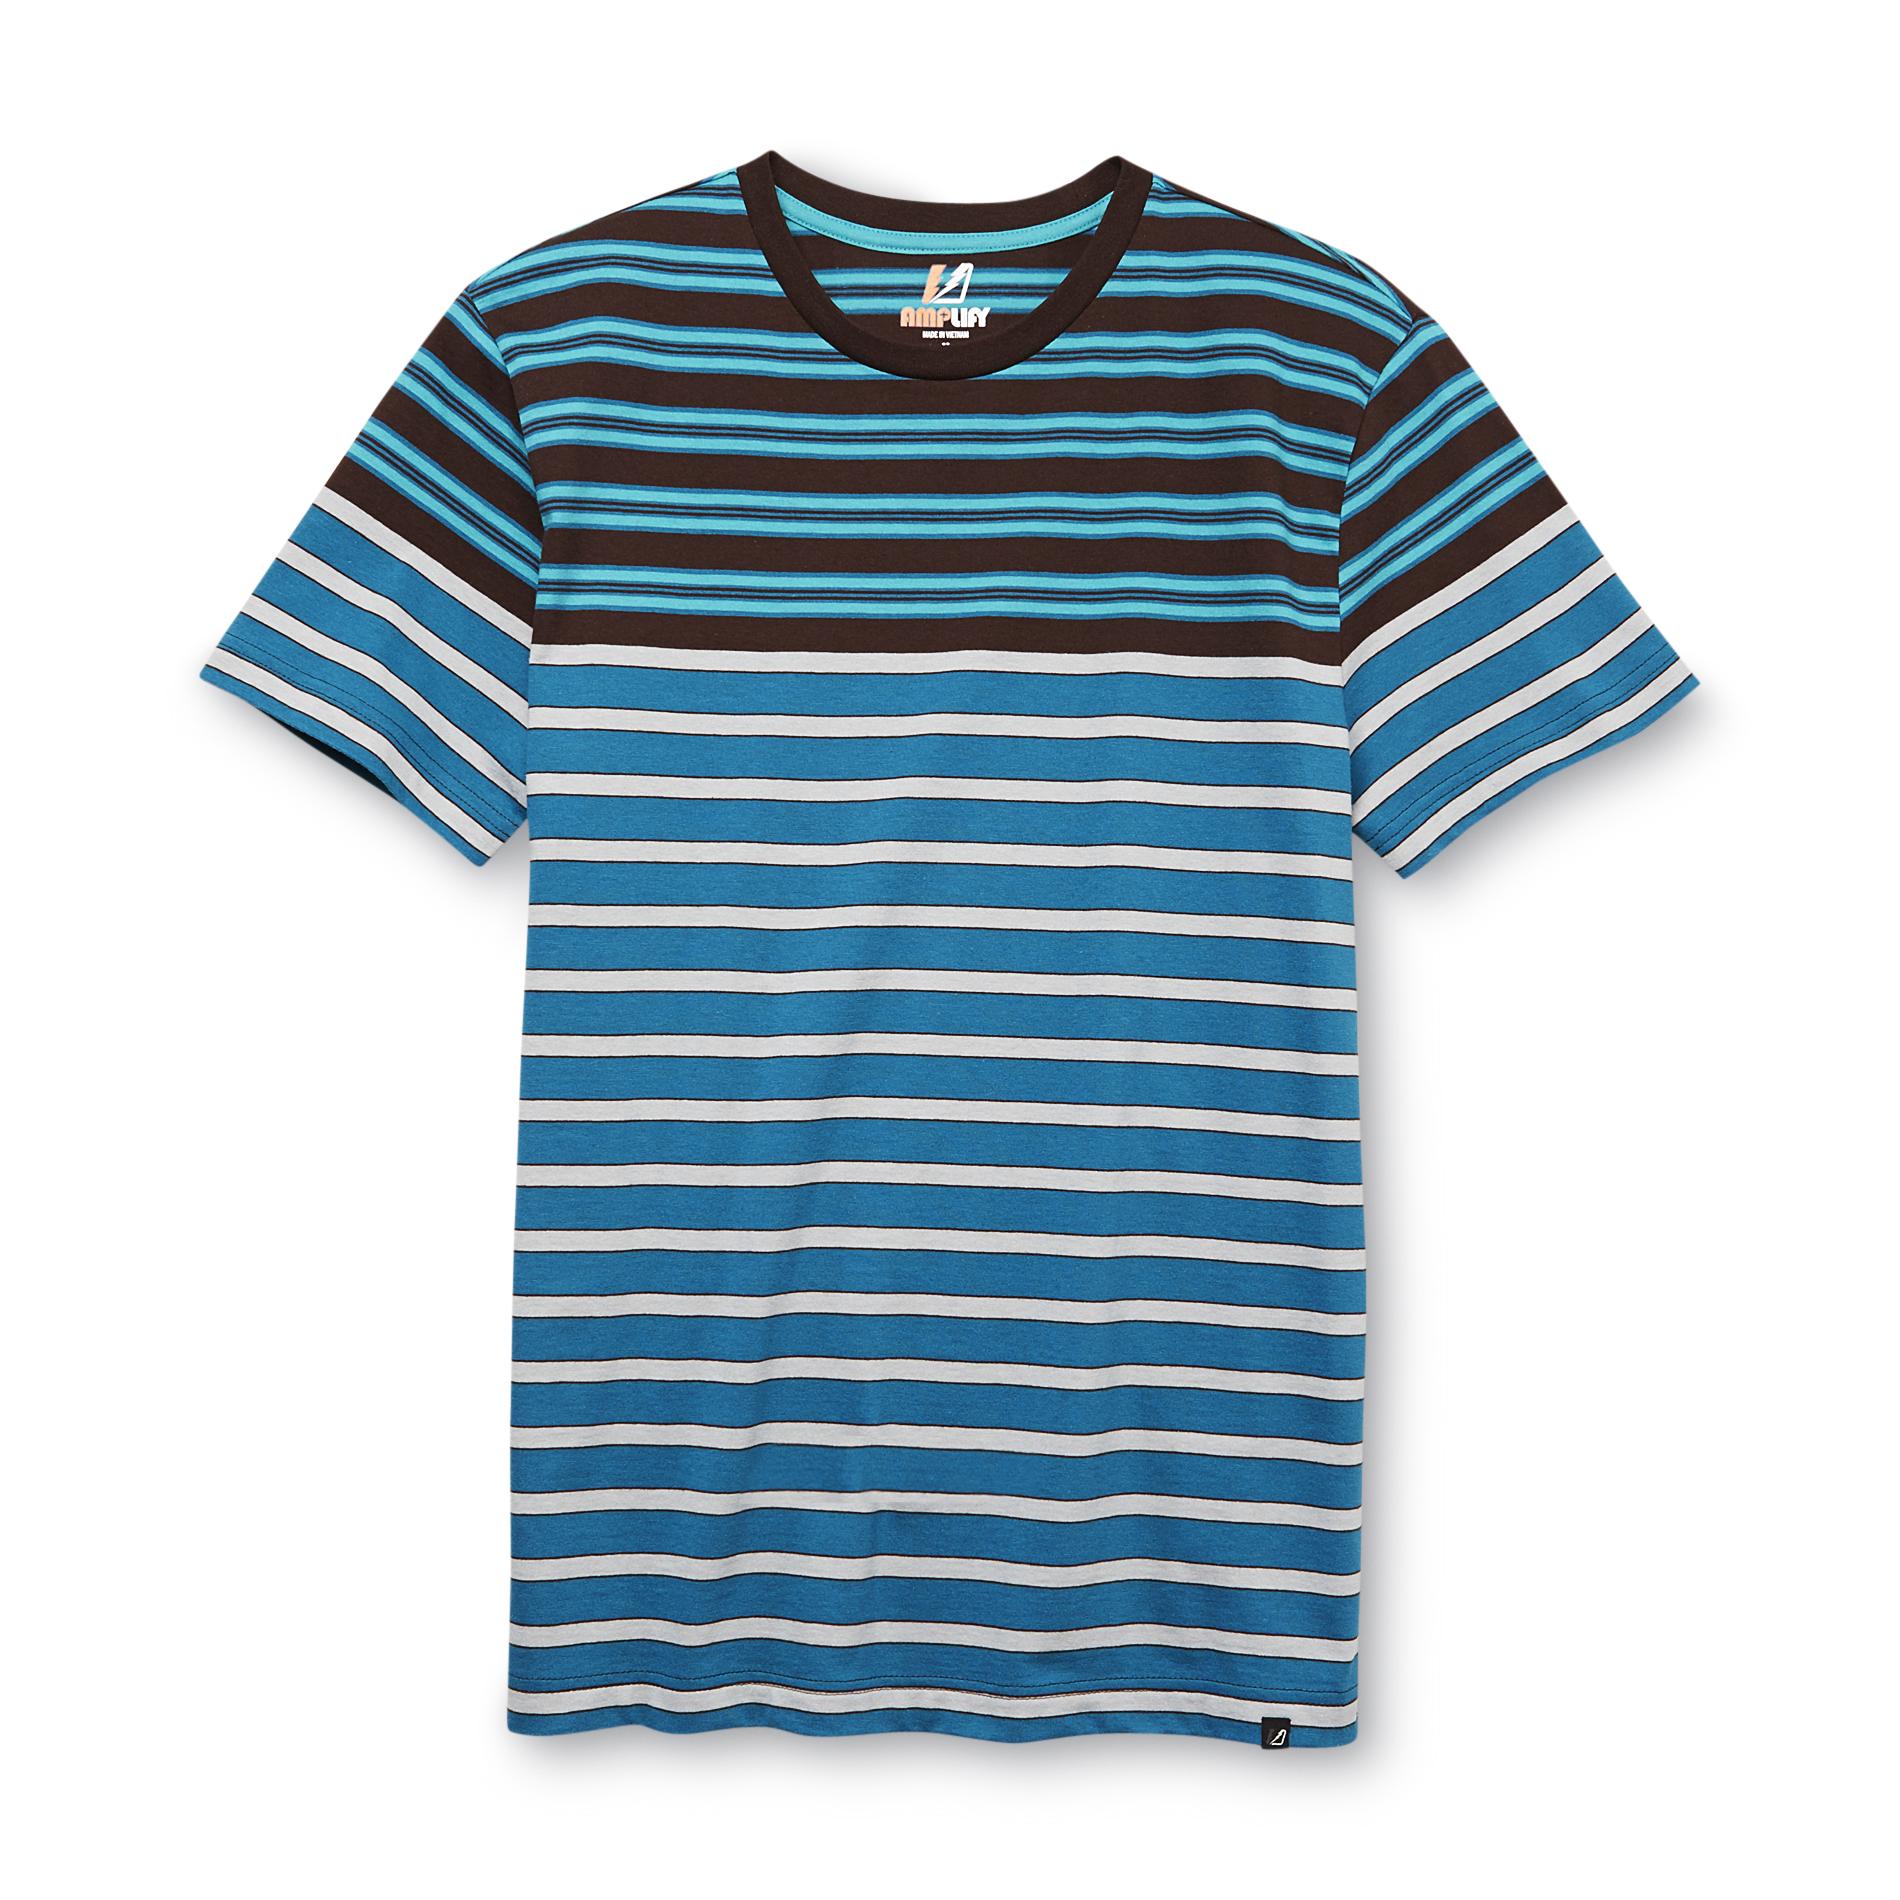 Amplify Young Men's Crew Neck T-Shirt - Striped